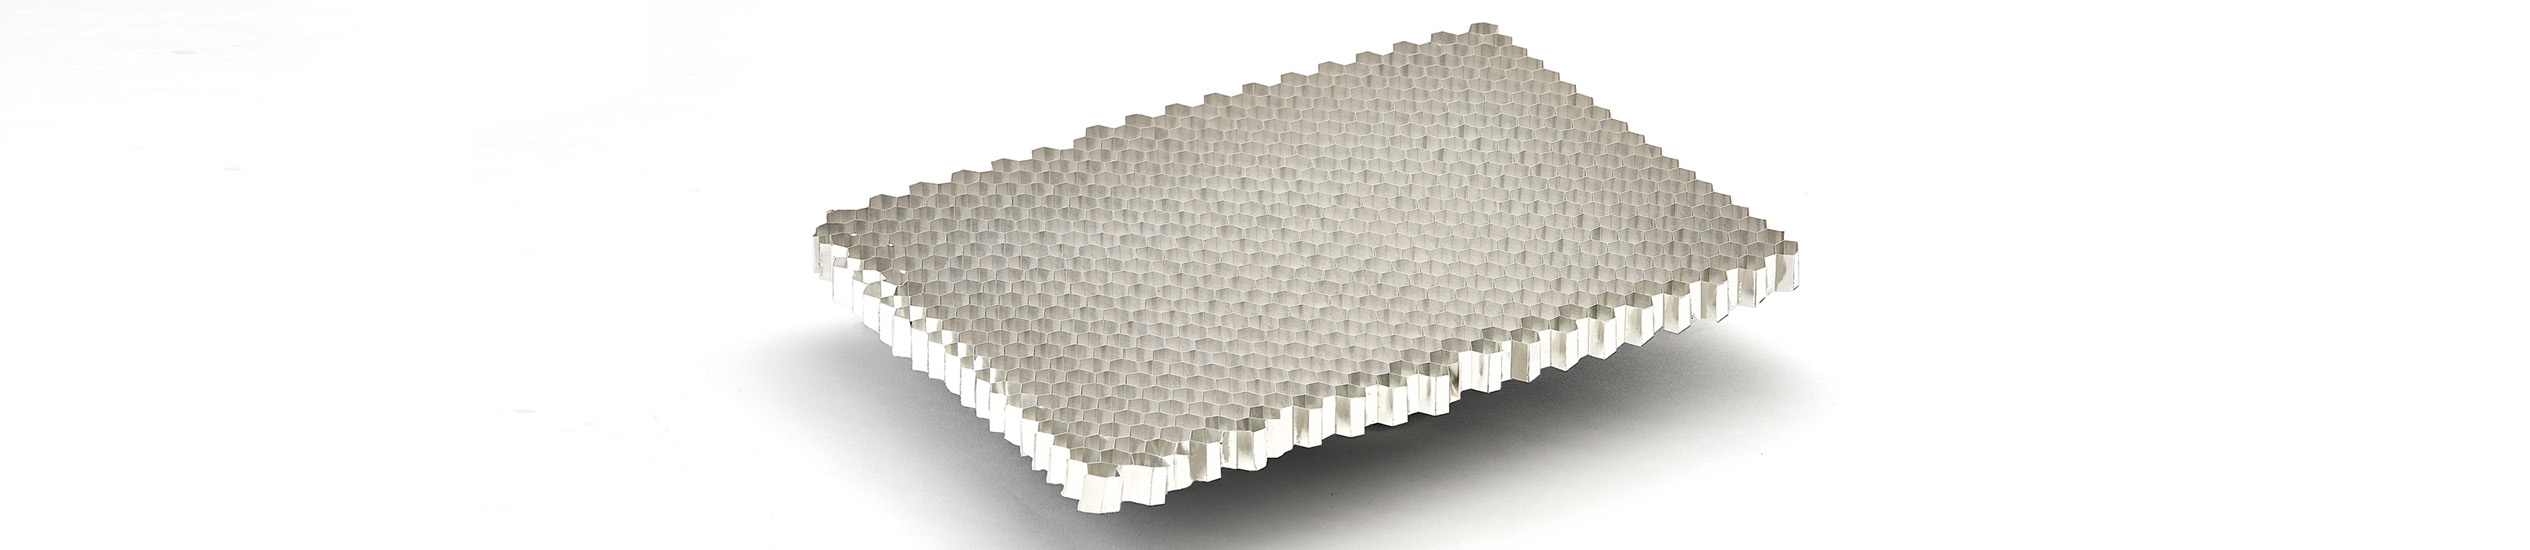 The aluminum honeycomb is a hexagonal core product similar to a bee cell. It is light, resistant to compression and cuts, has excellent fire reaction (incombust